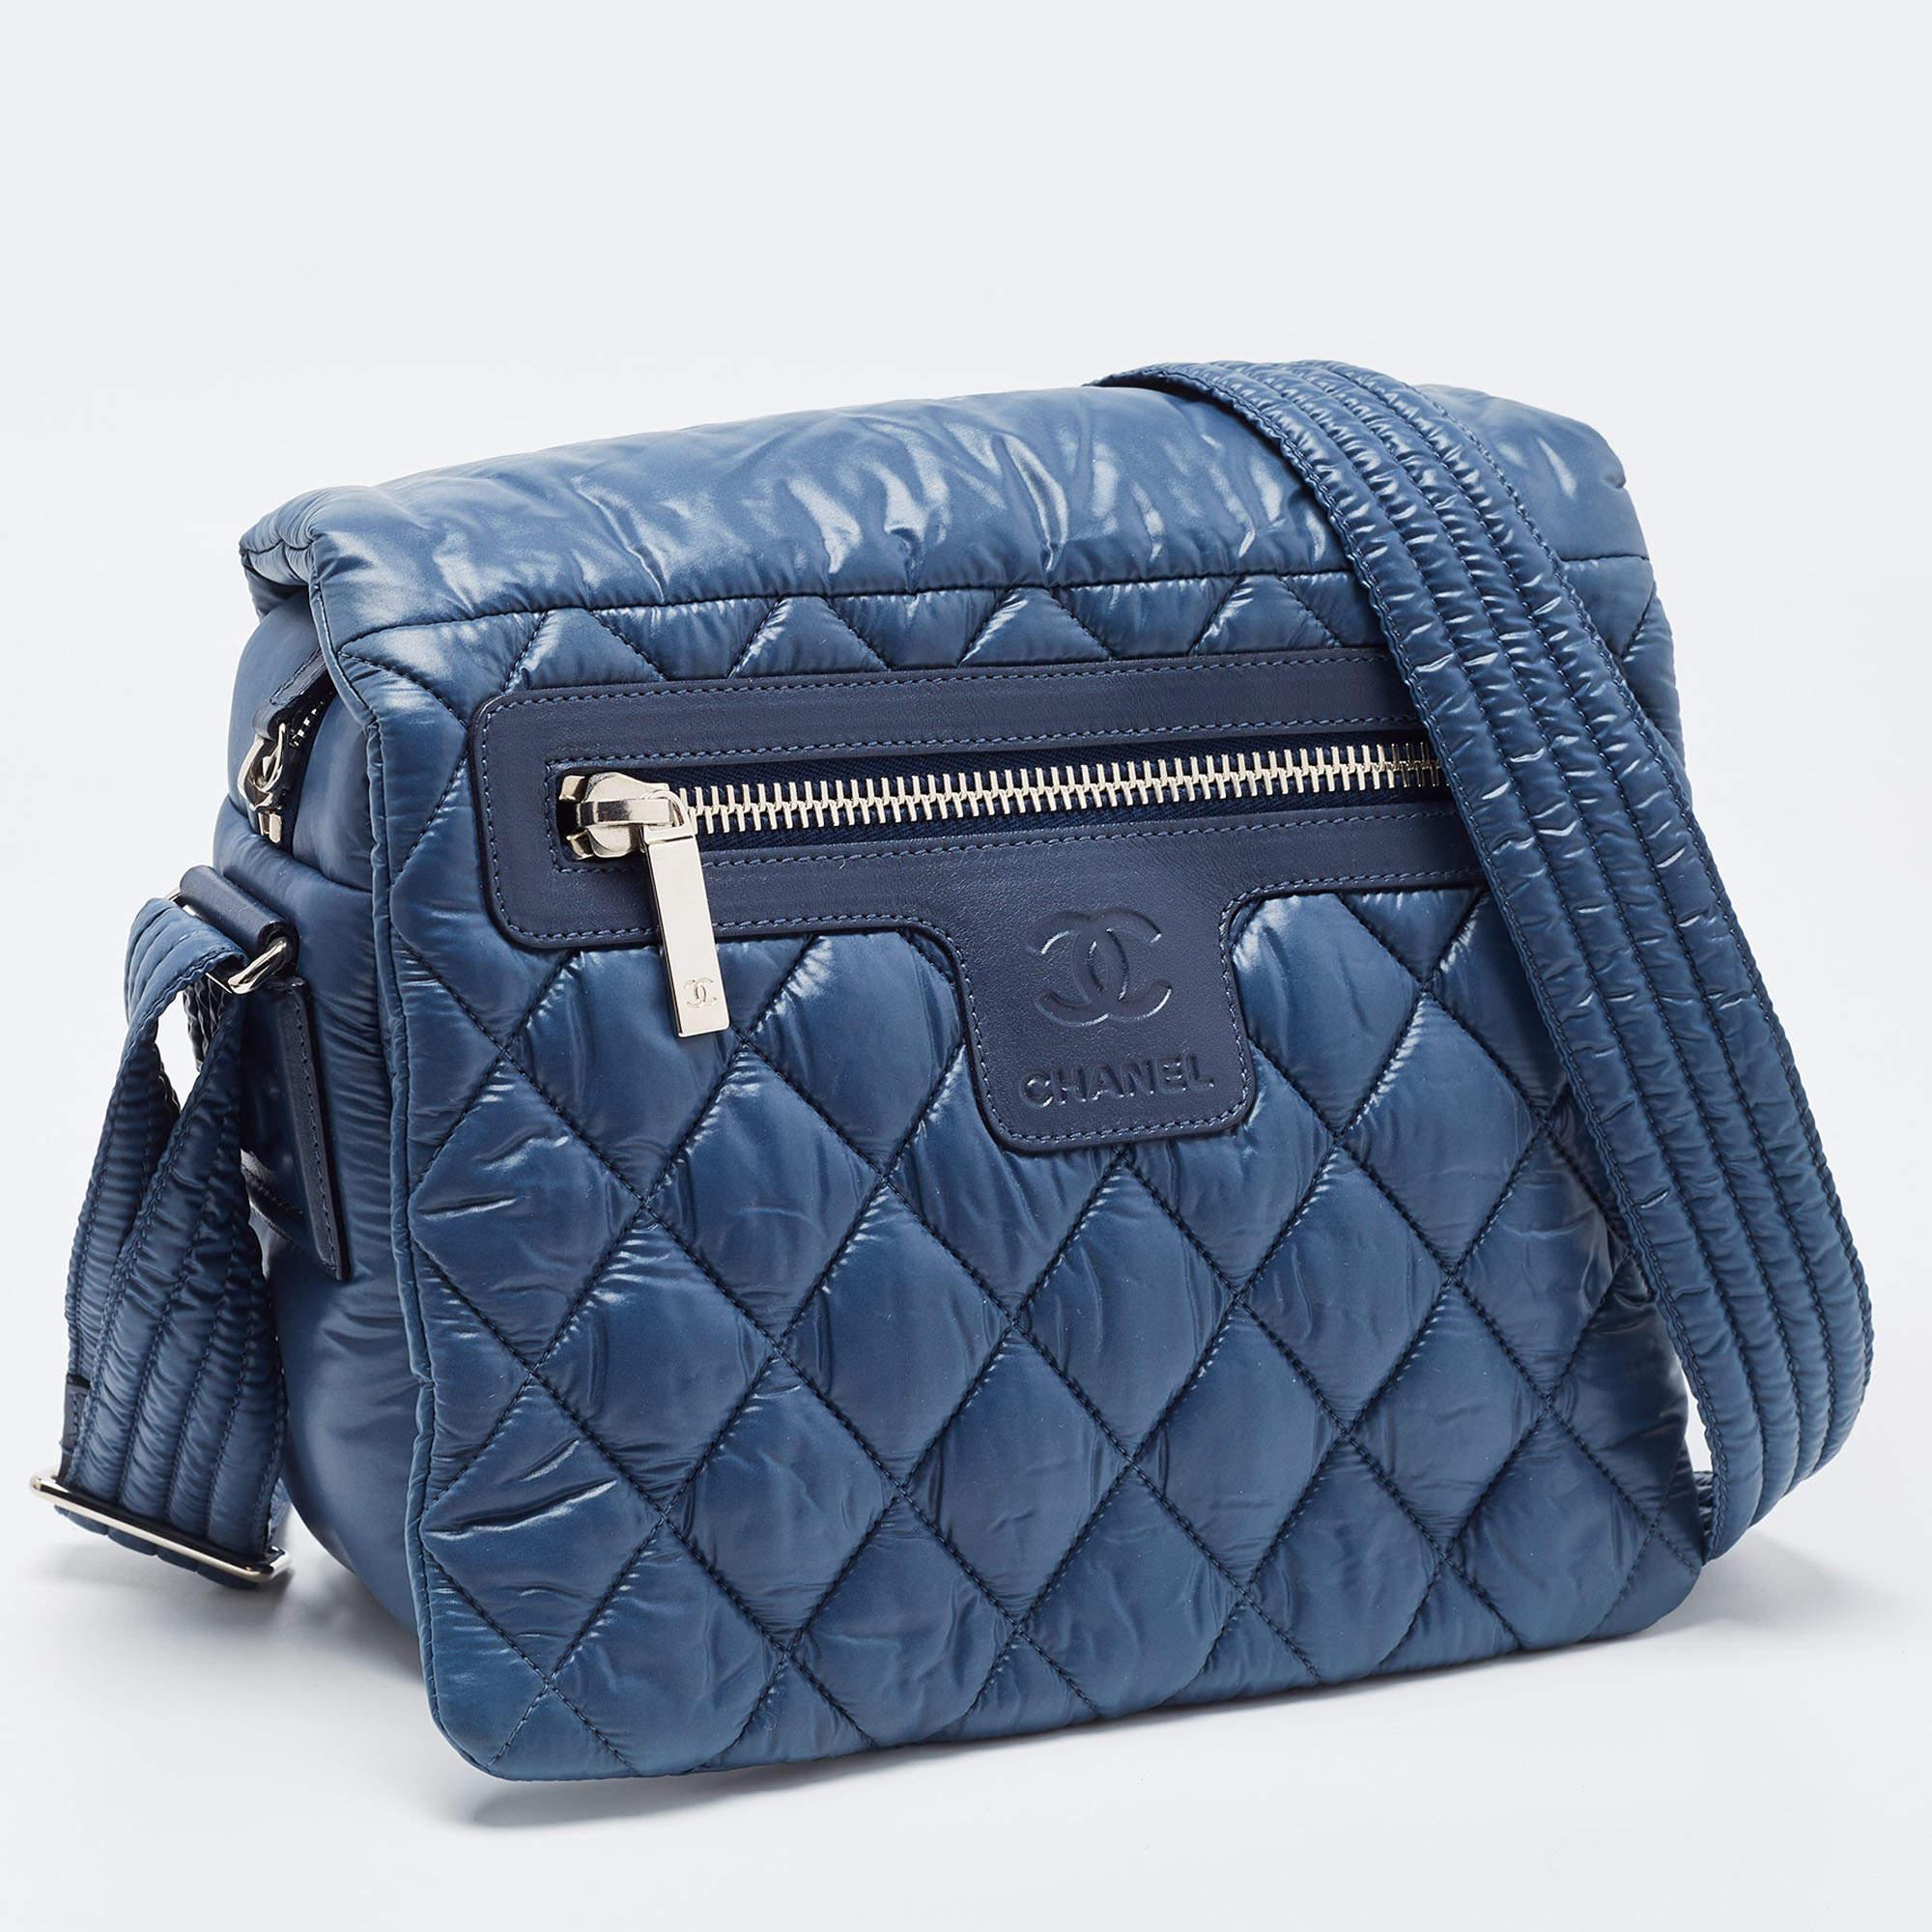 Chanel Blue Quilted Nylon Small Coco Cocoon Messenger Bag In Excellent Condition For Sale In Dubai, Al Qouz 2